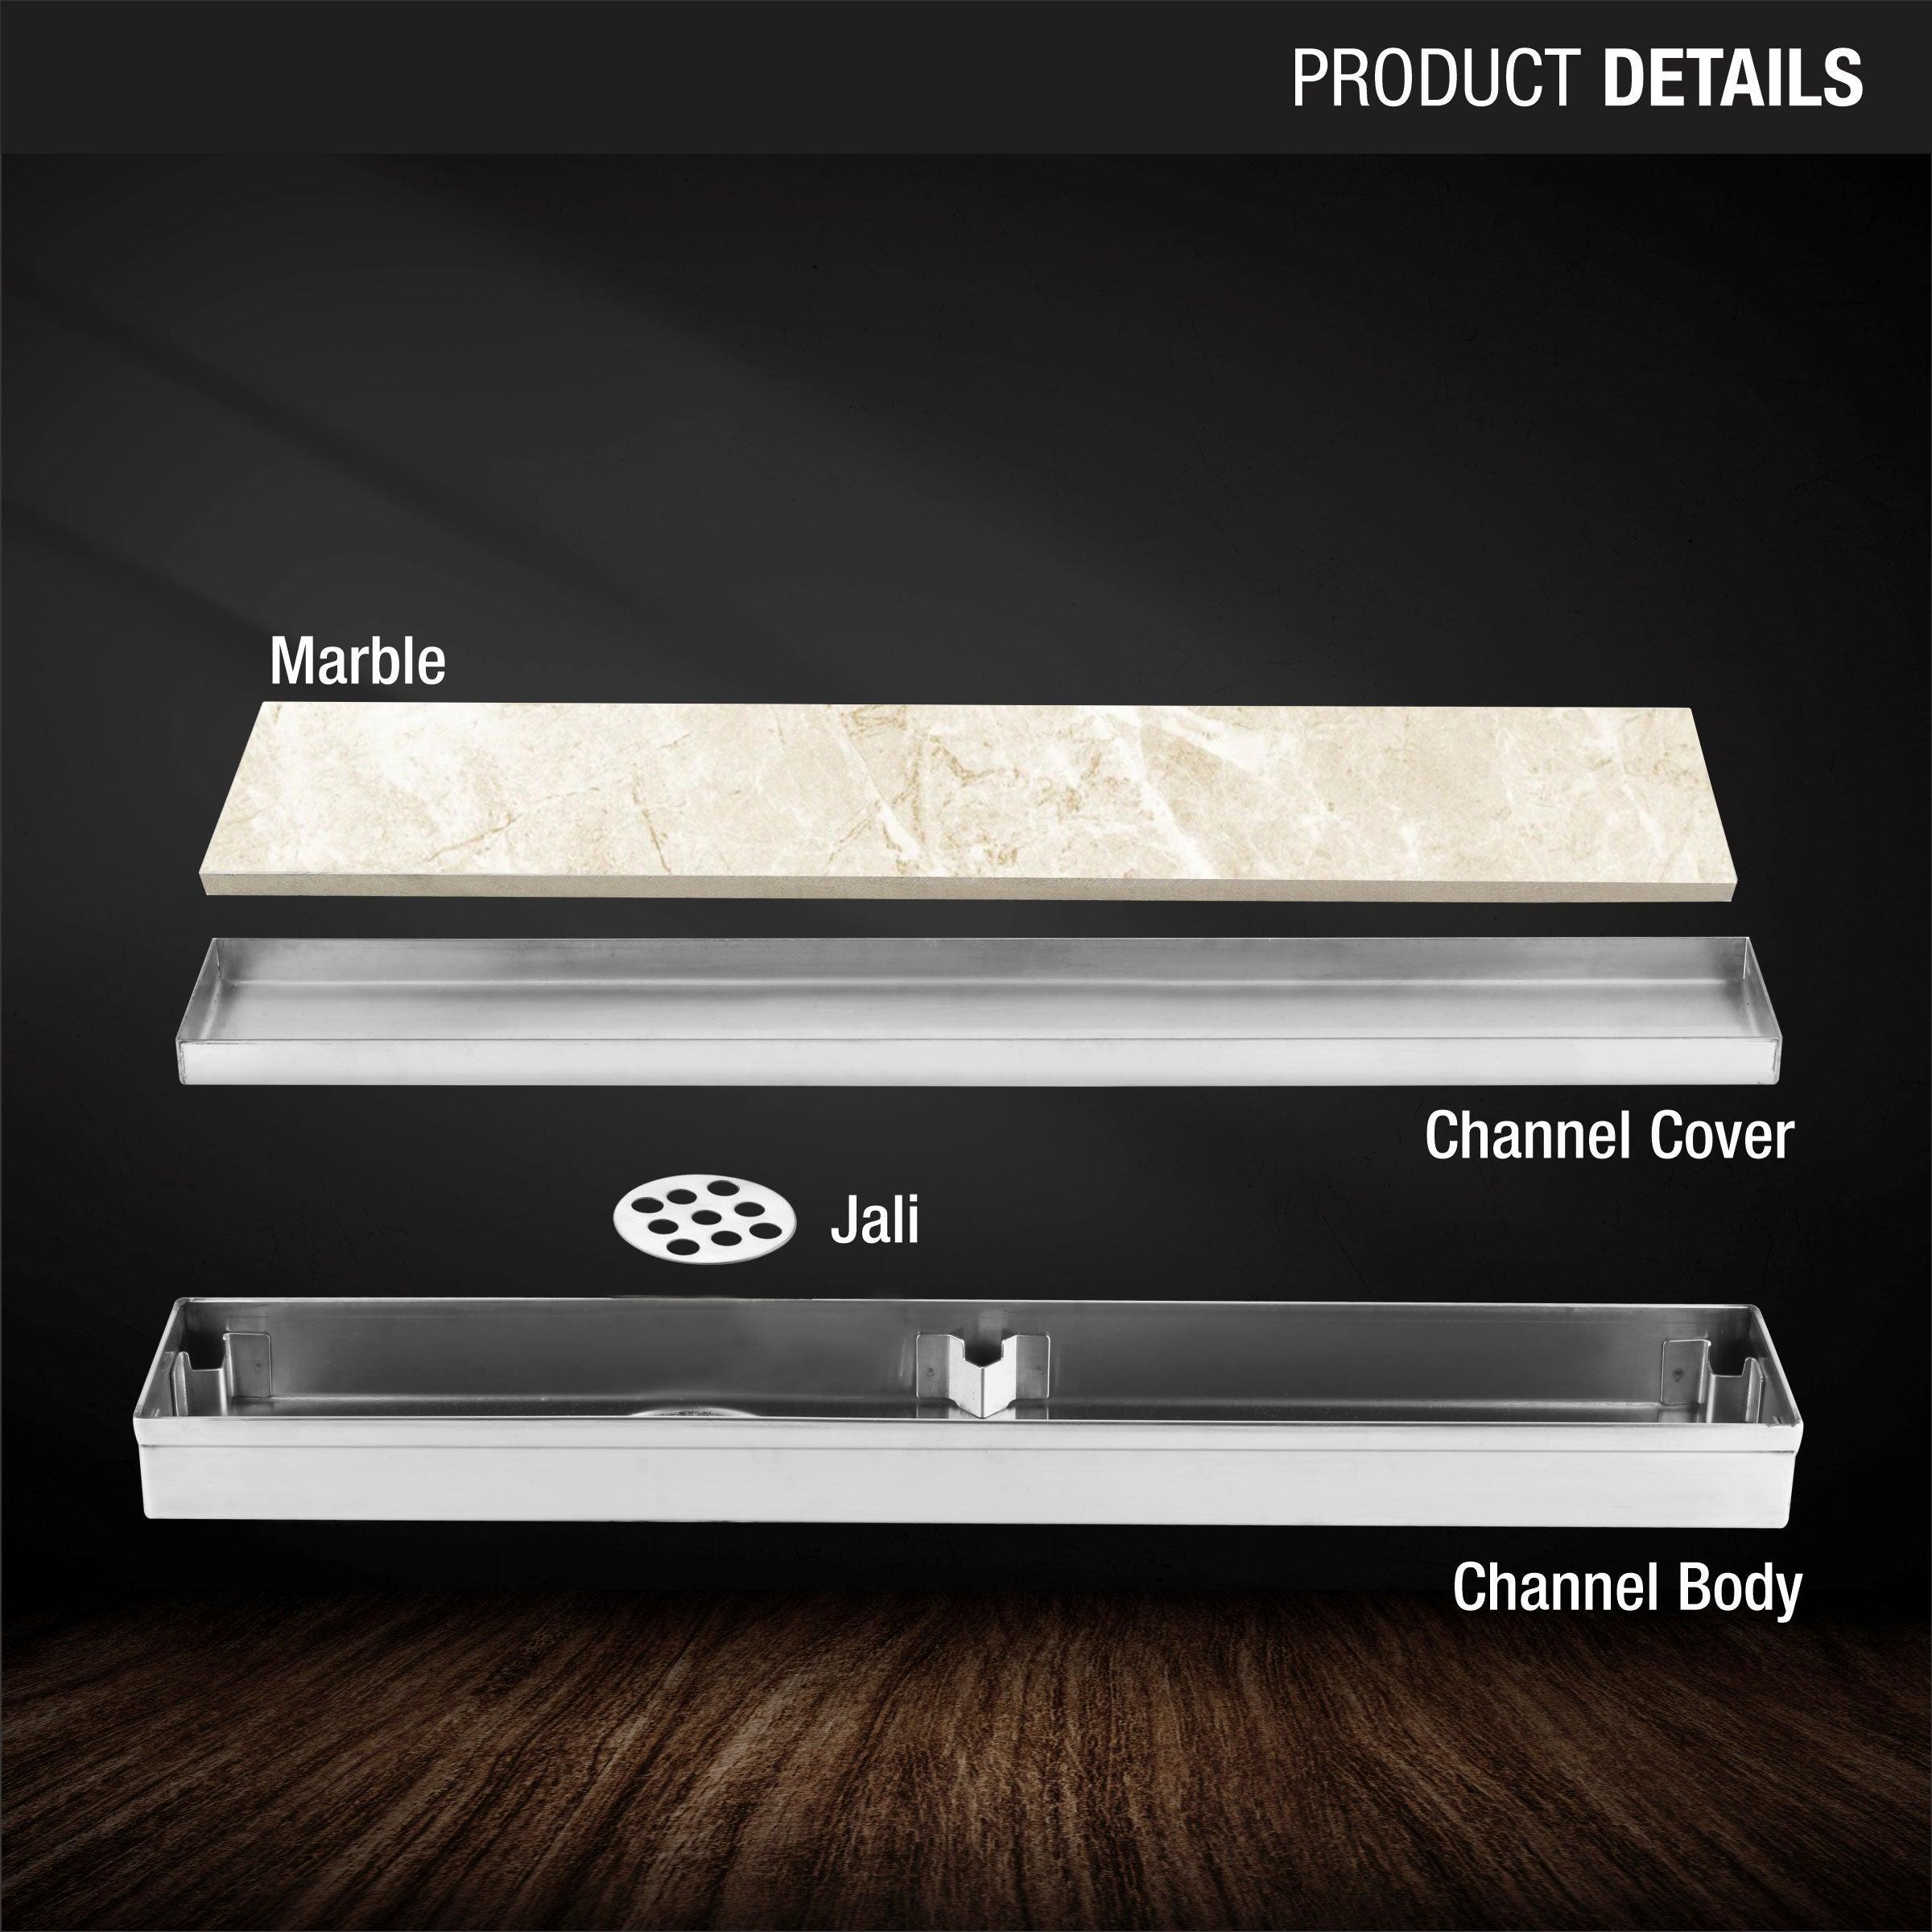 Marble Insert Shower Drain Channel (12 x 2 Inches) product details